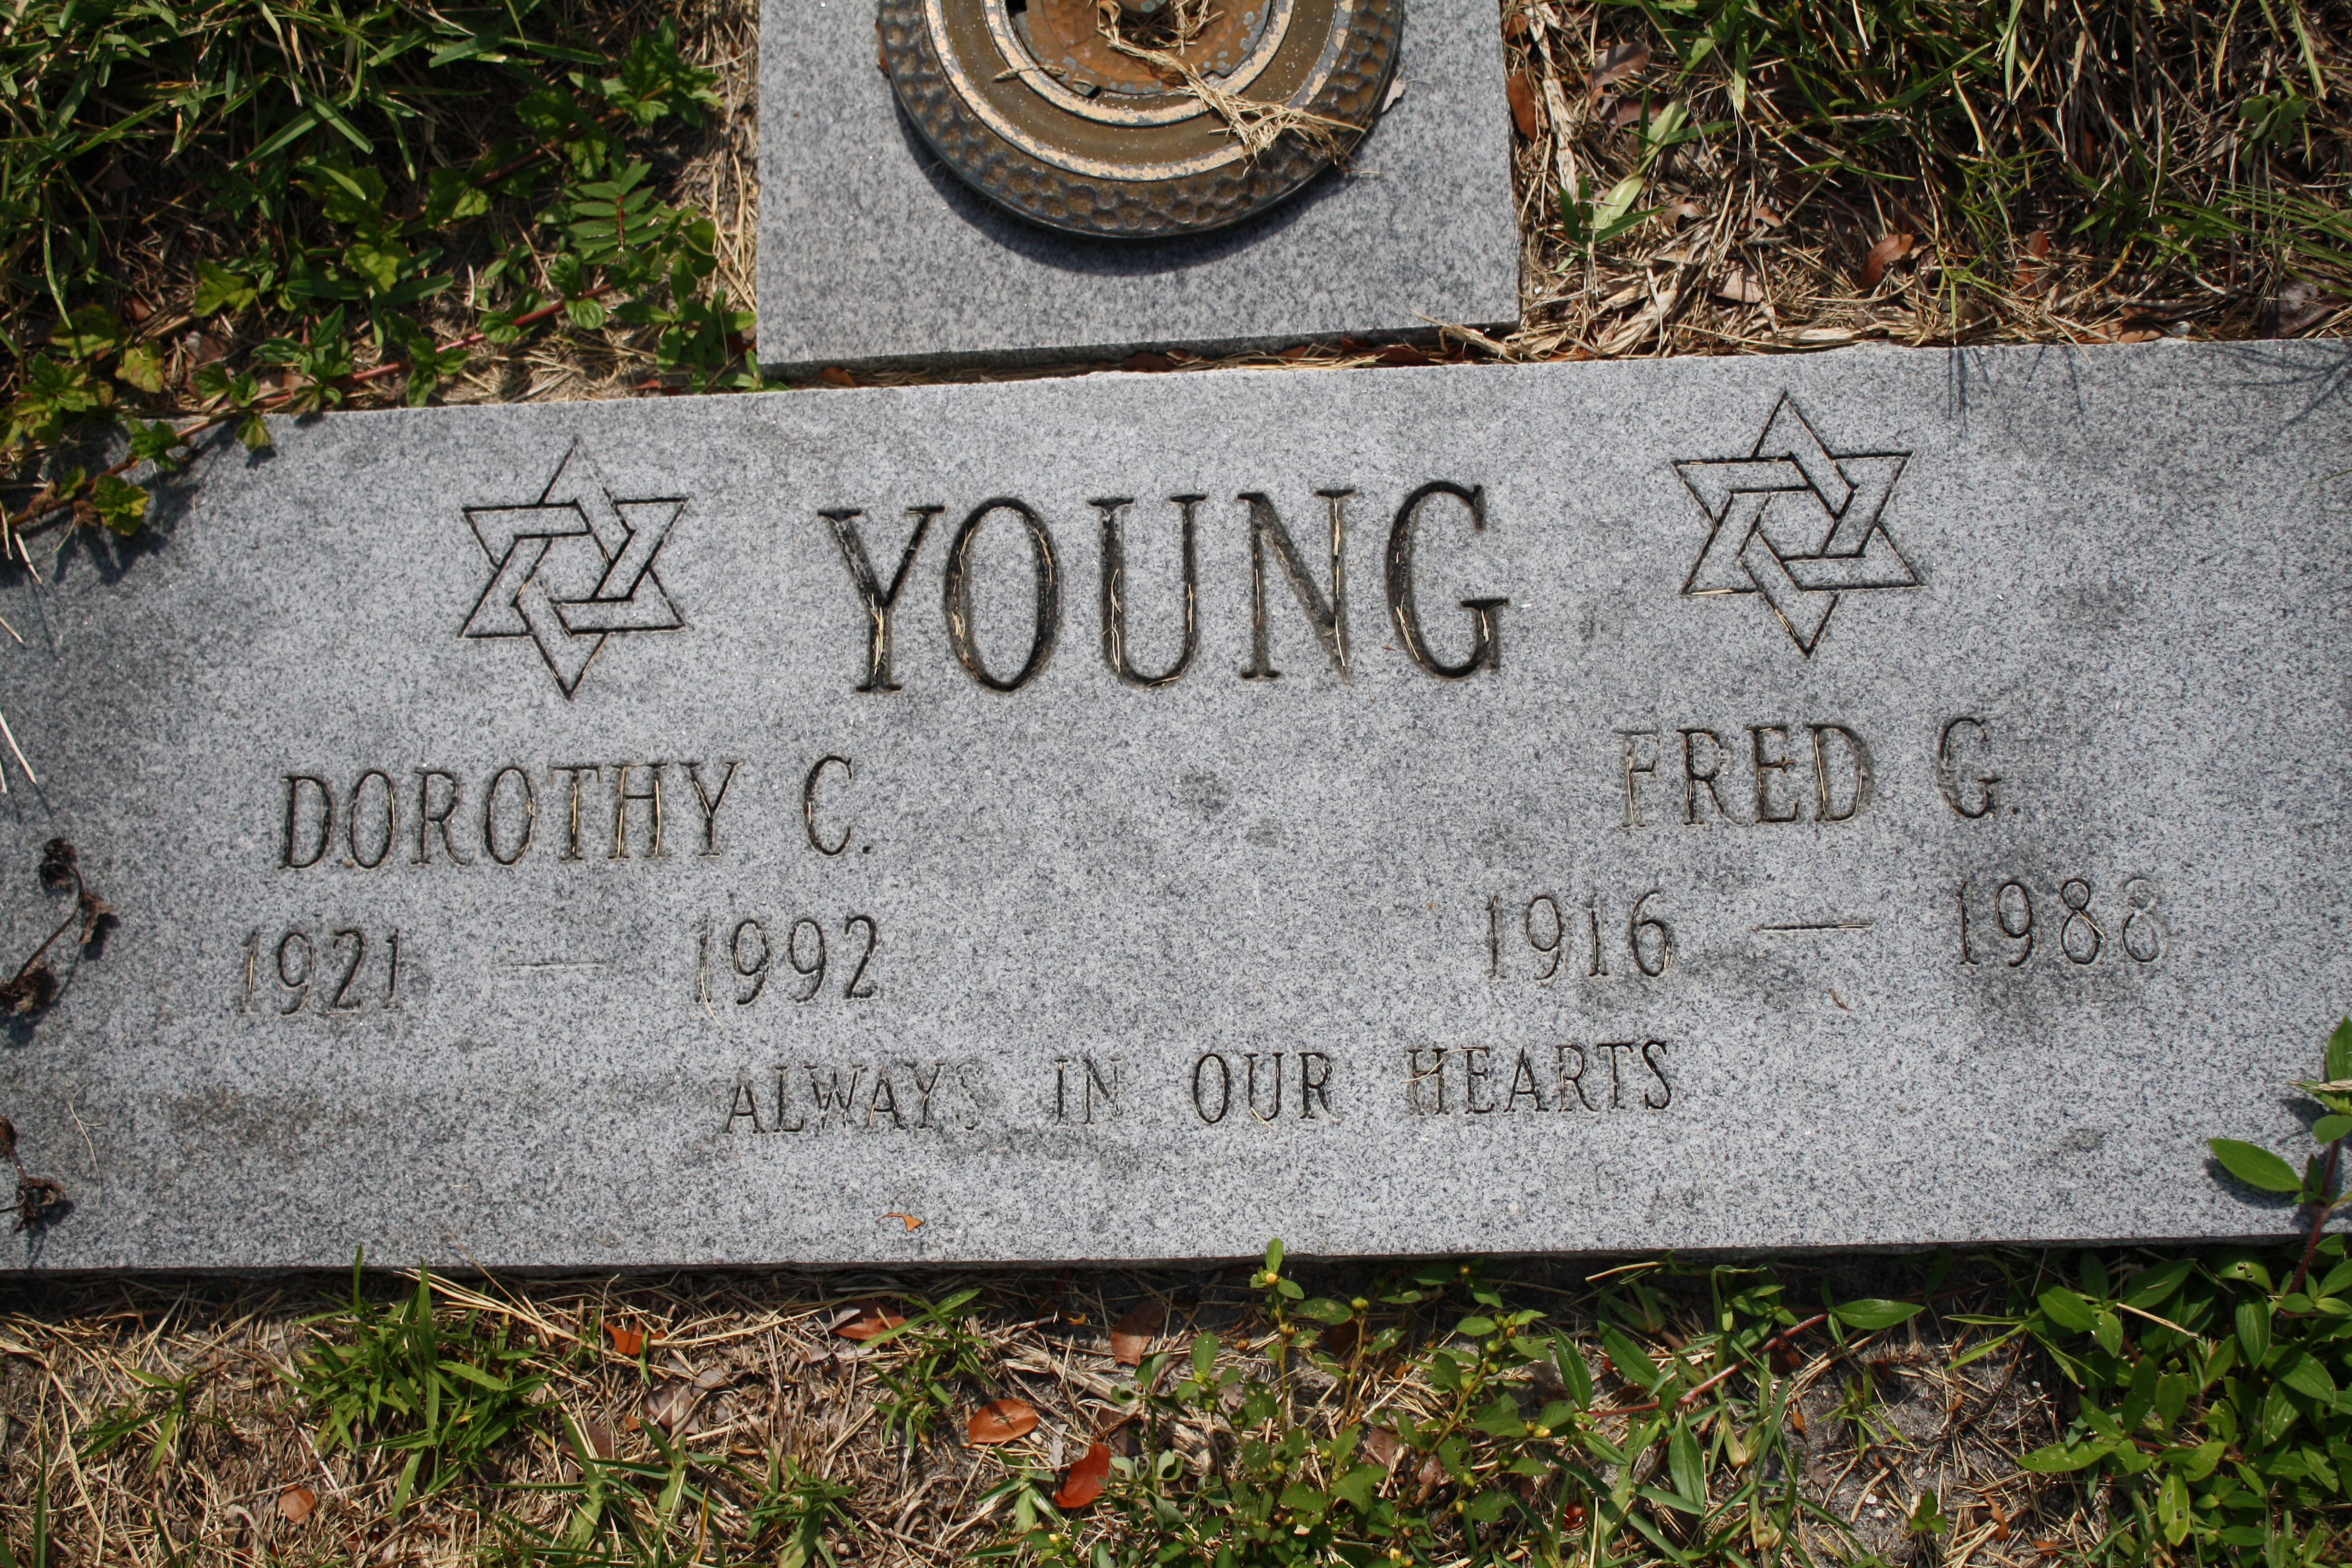 Fred G Young